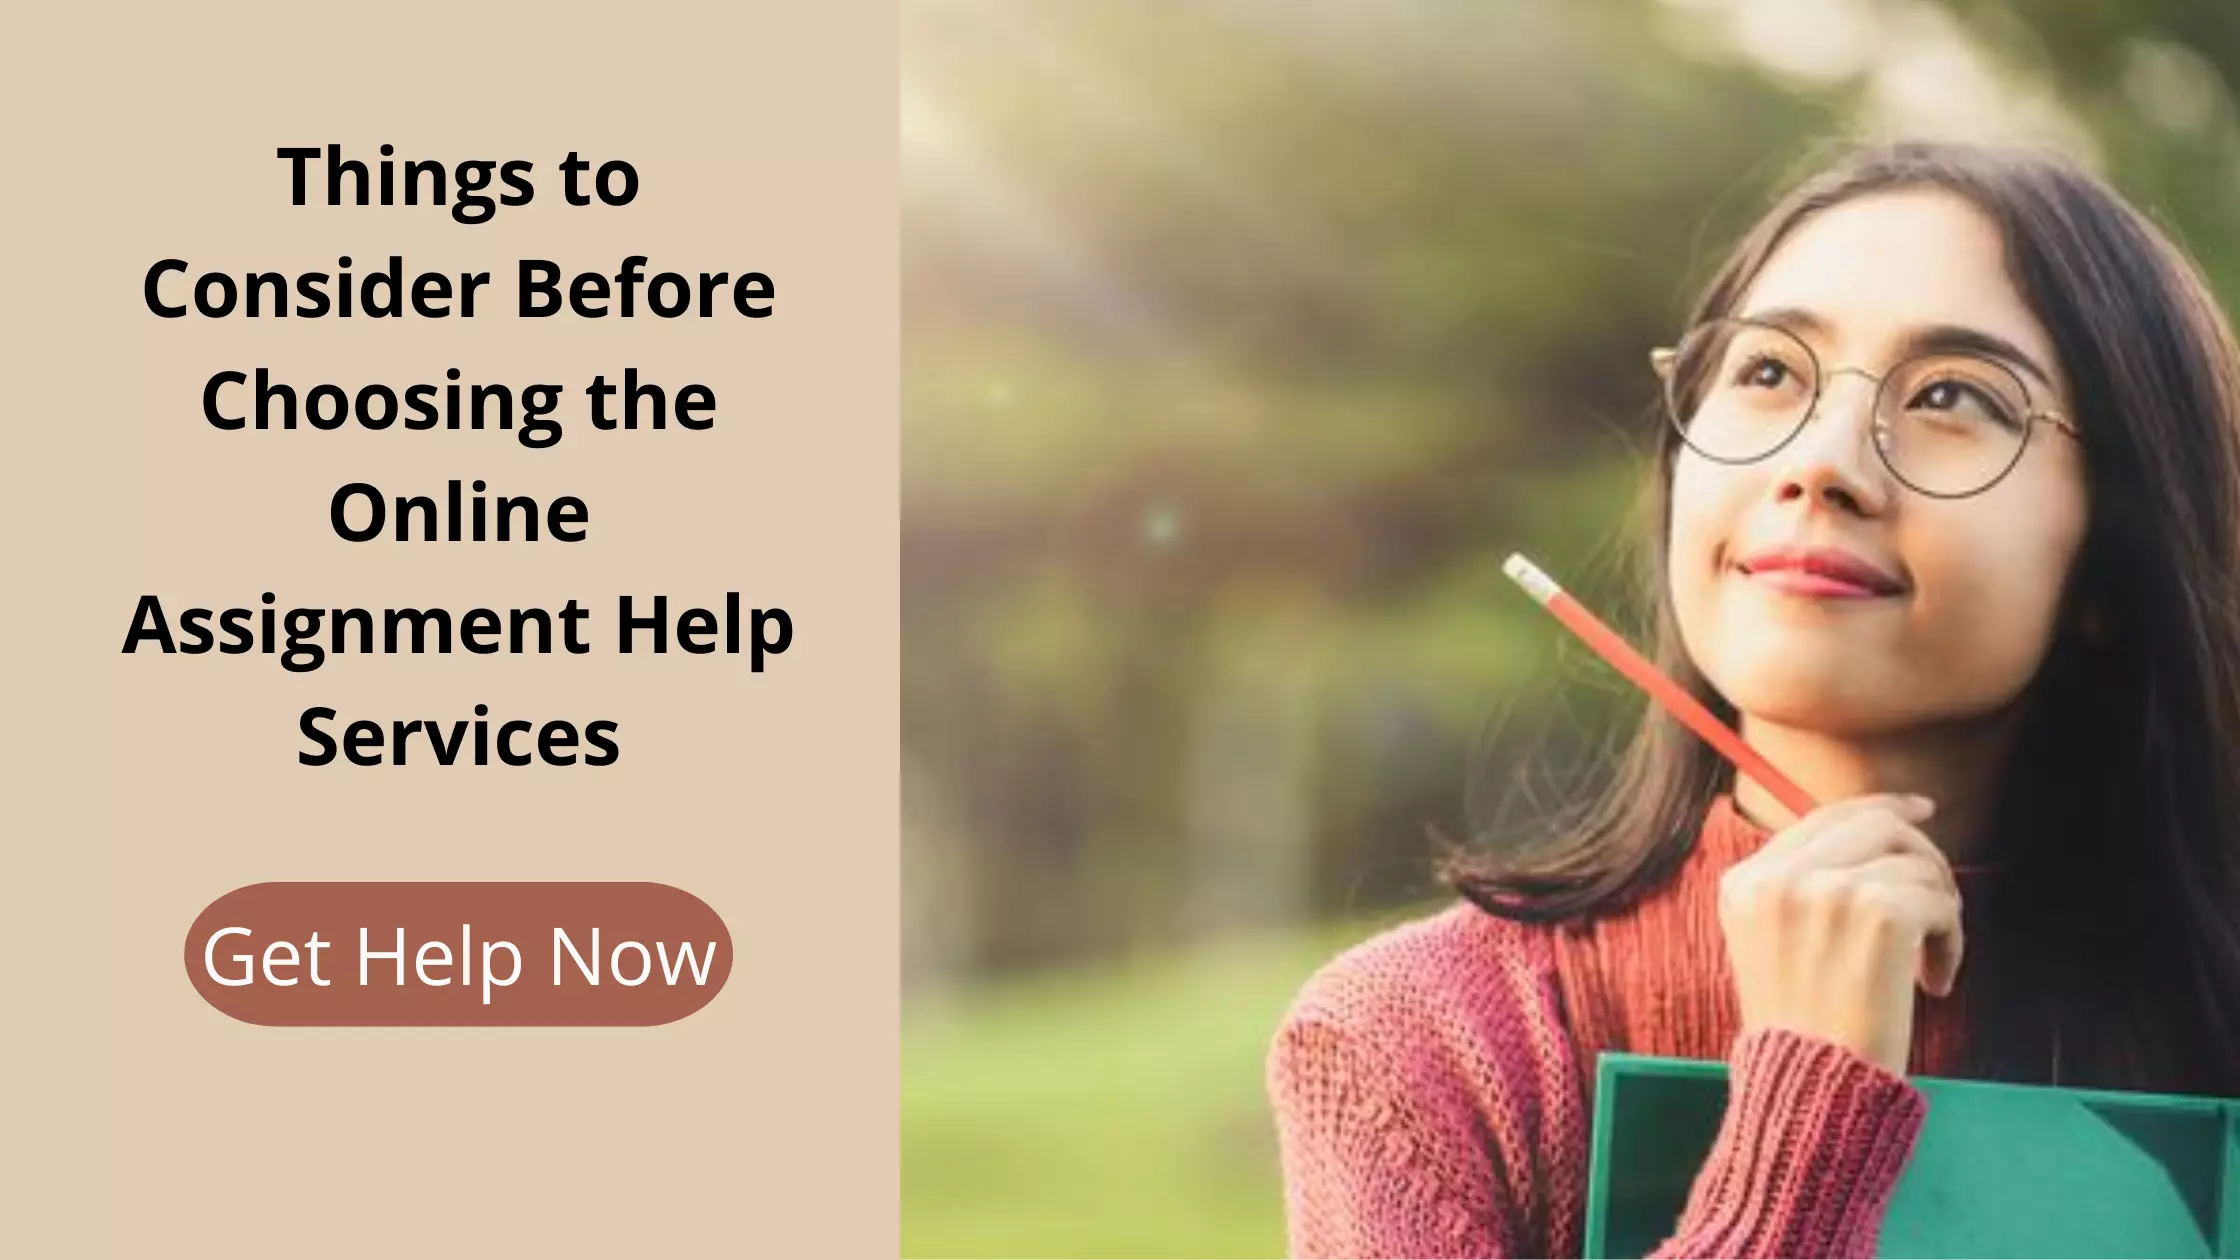 Things to Consider Before Choosing the Online Assignment Help Services